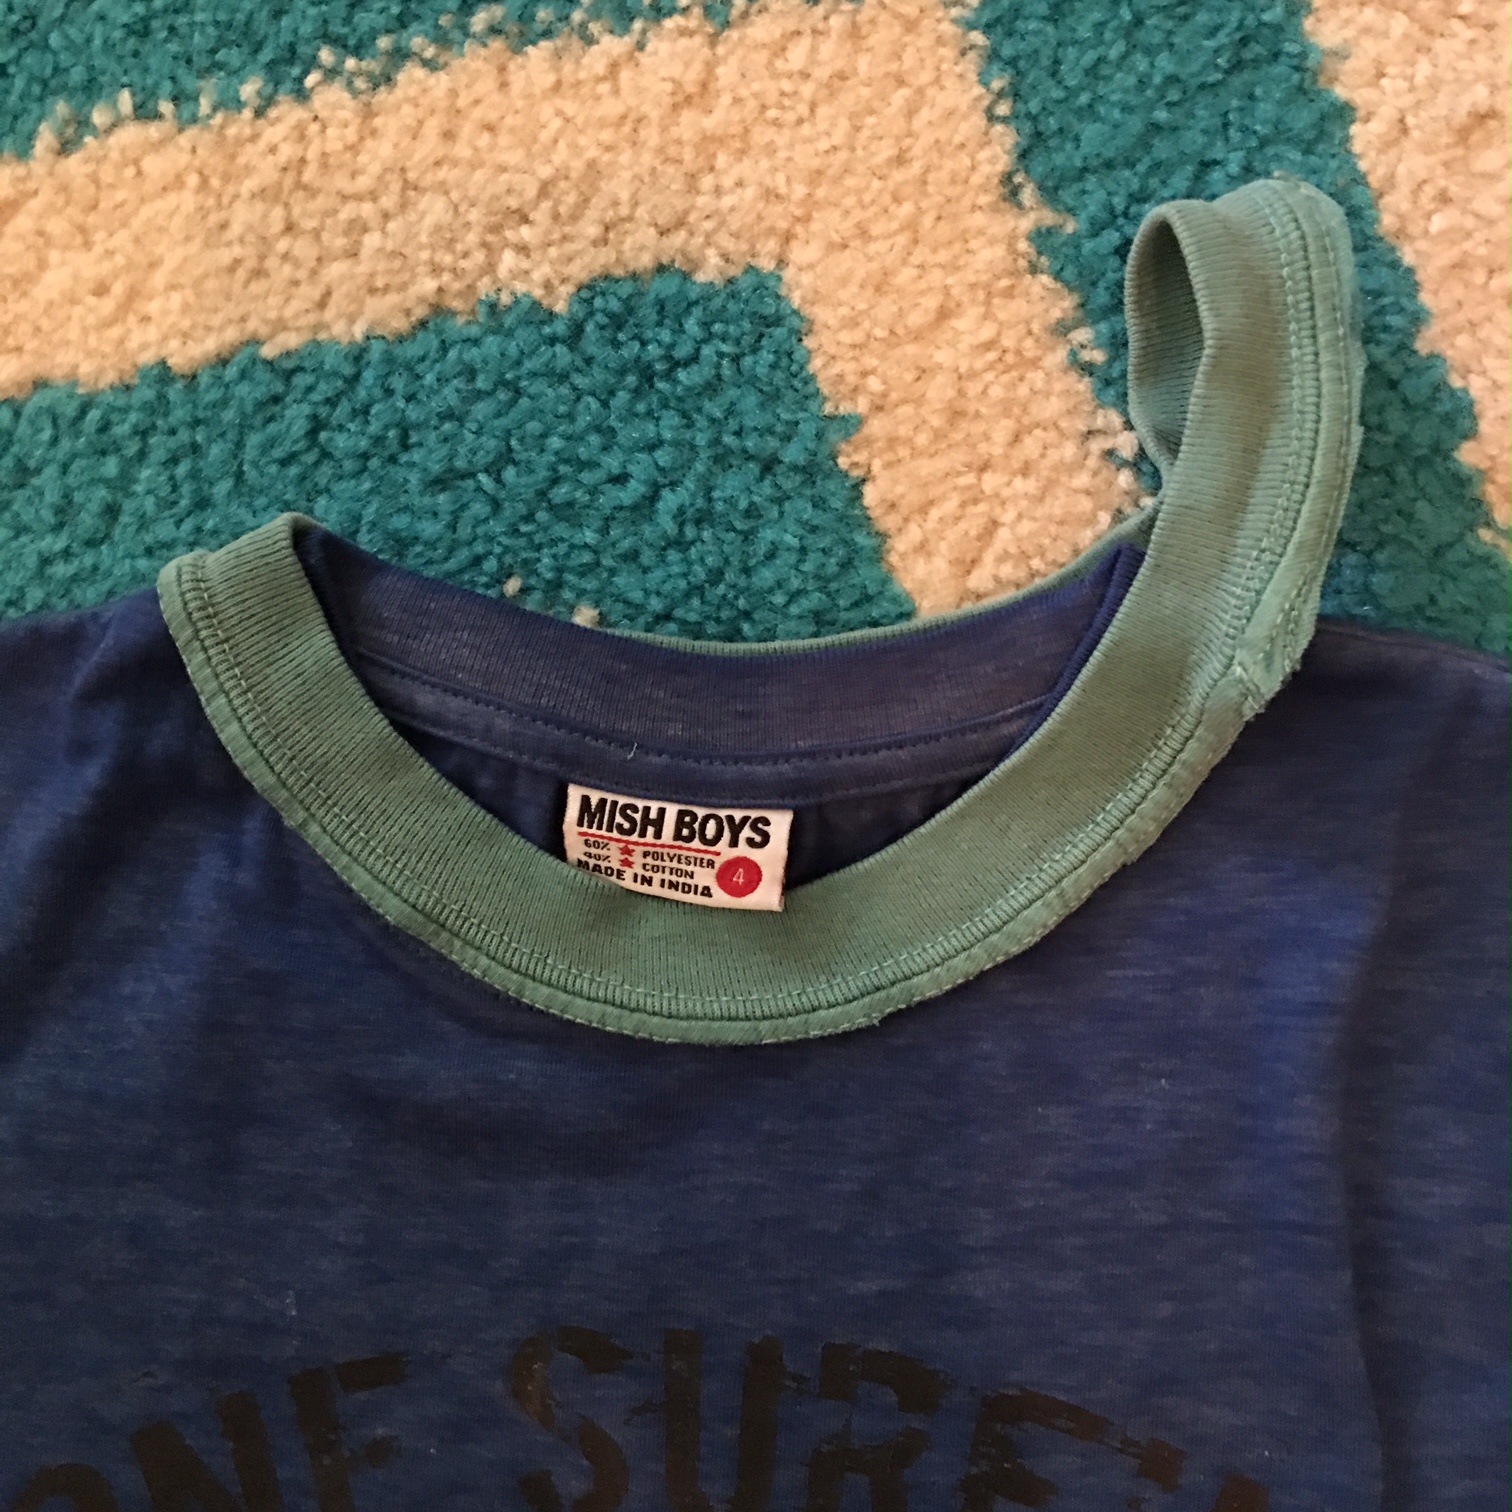 Marla, Plain and Small: 3XL T-Shirt Turned Into Toddler Tunic